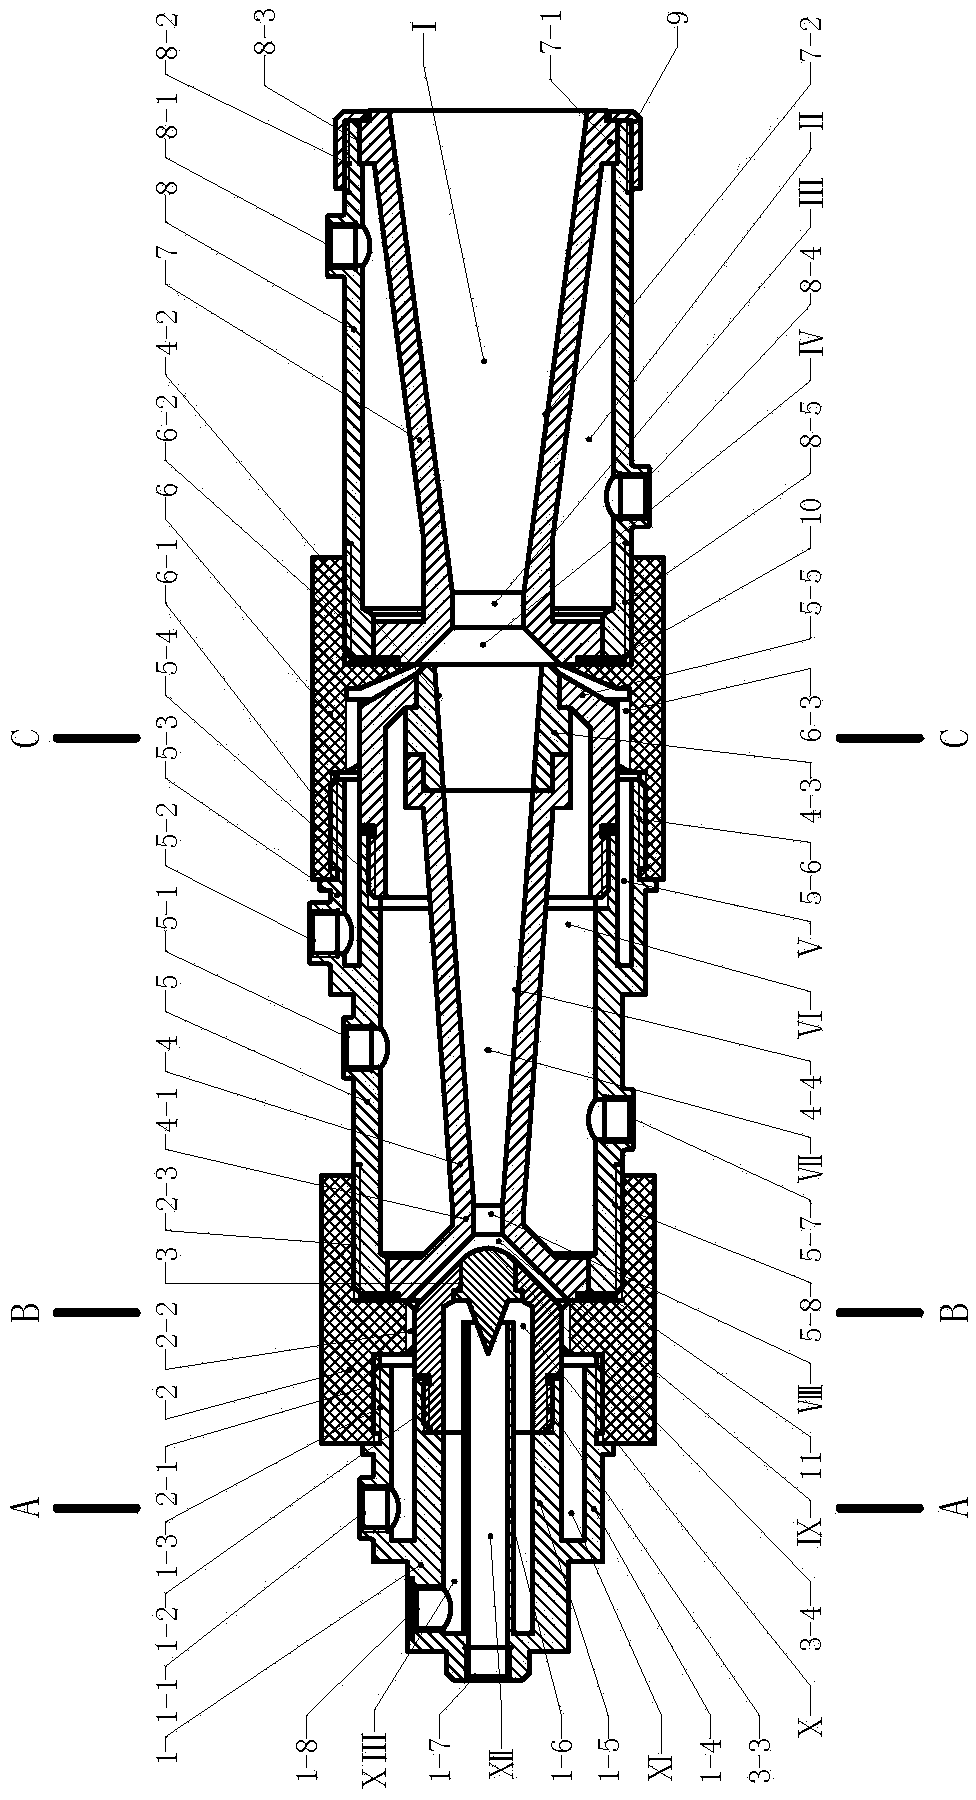 Plasma torch of double-stage nozzle structure